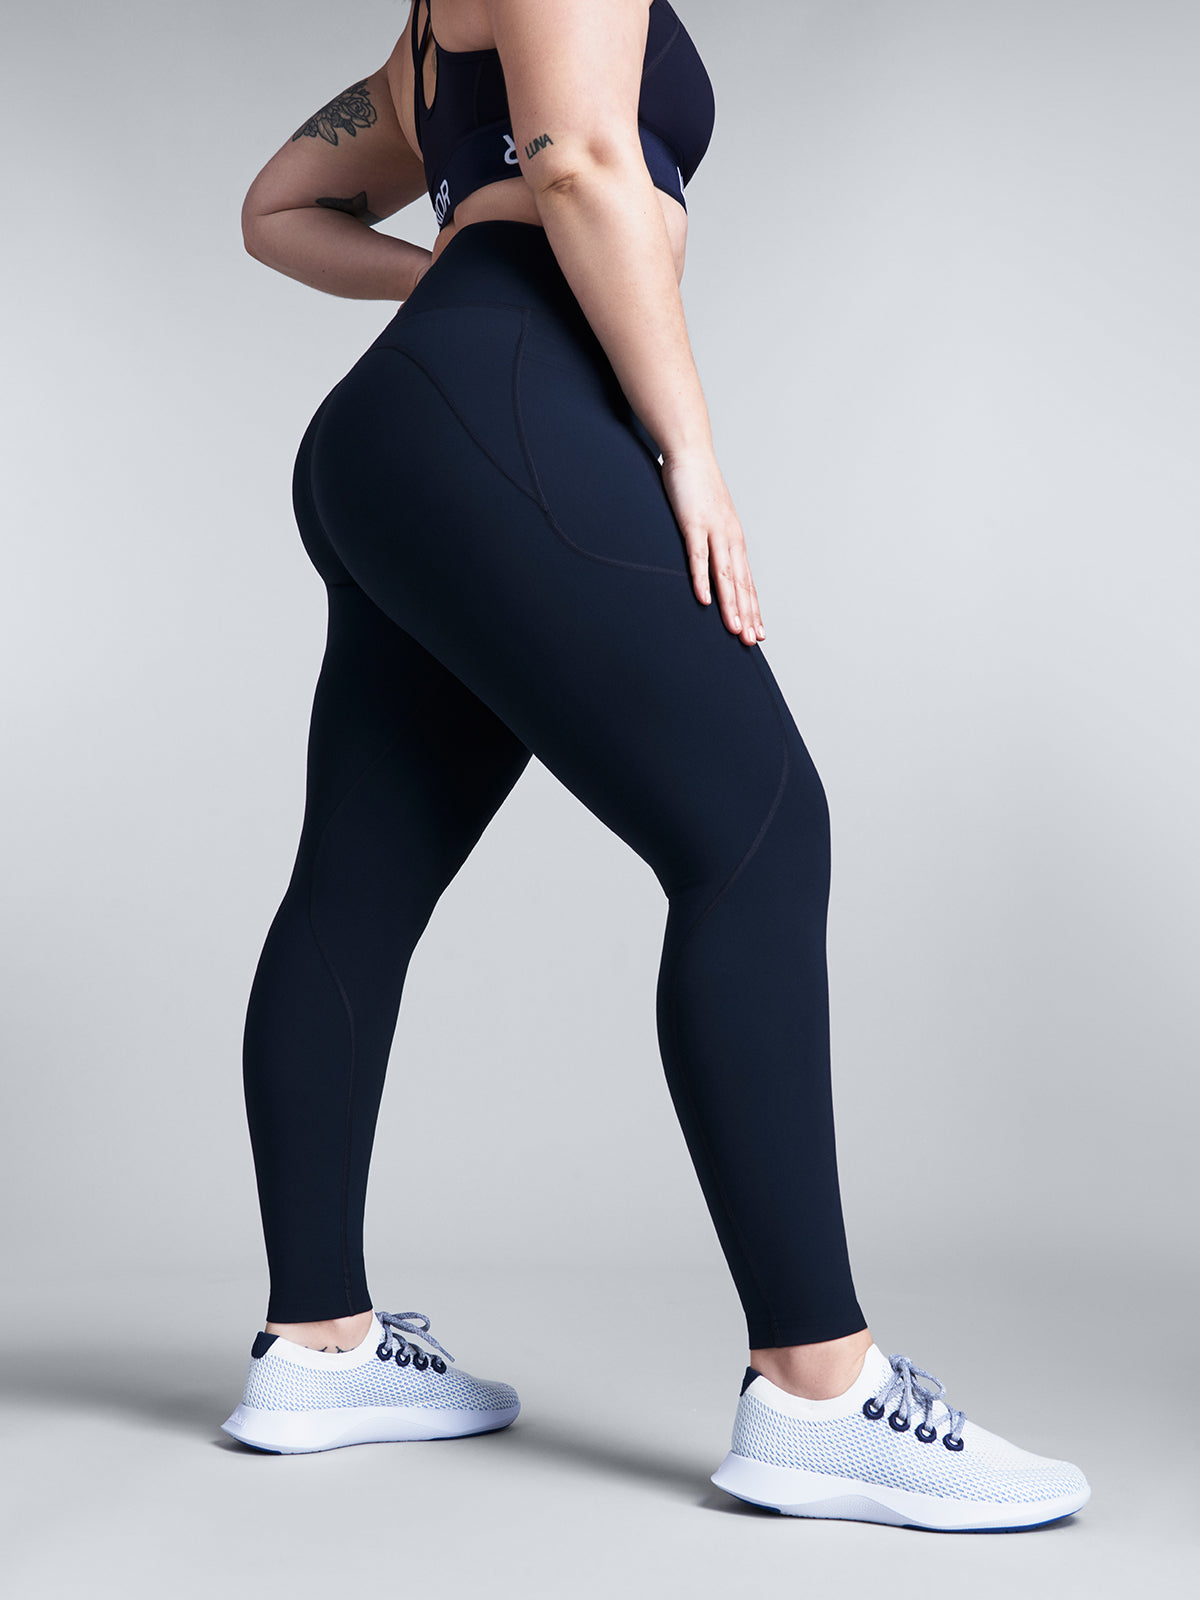 Better Than Lululemon? Why LNDR Activewear Should Be Your New Go